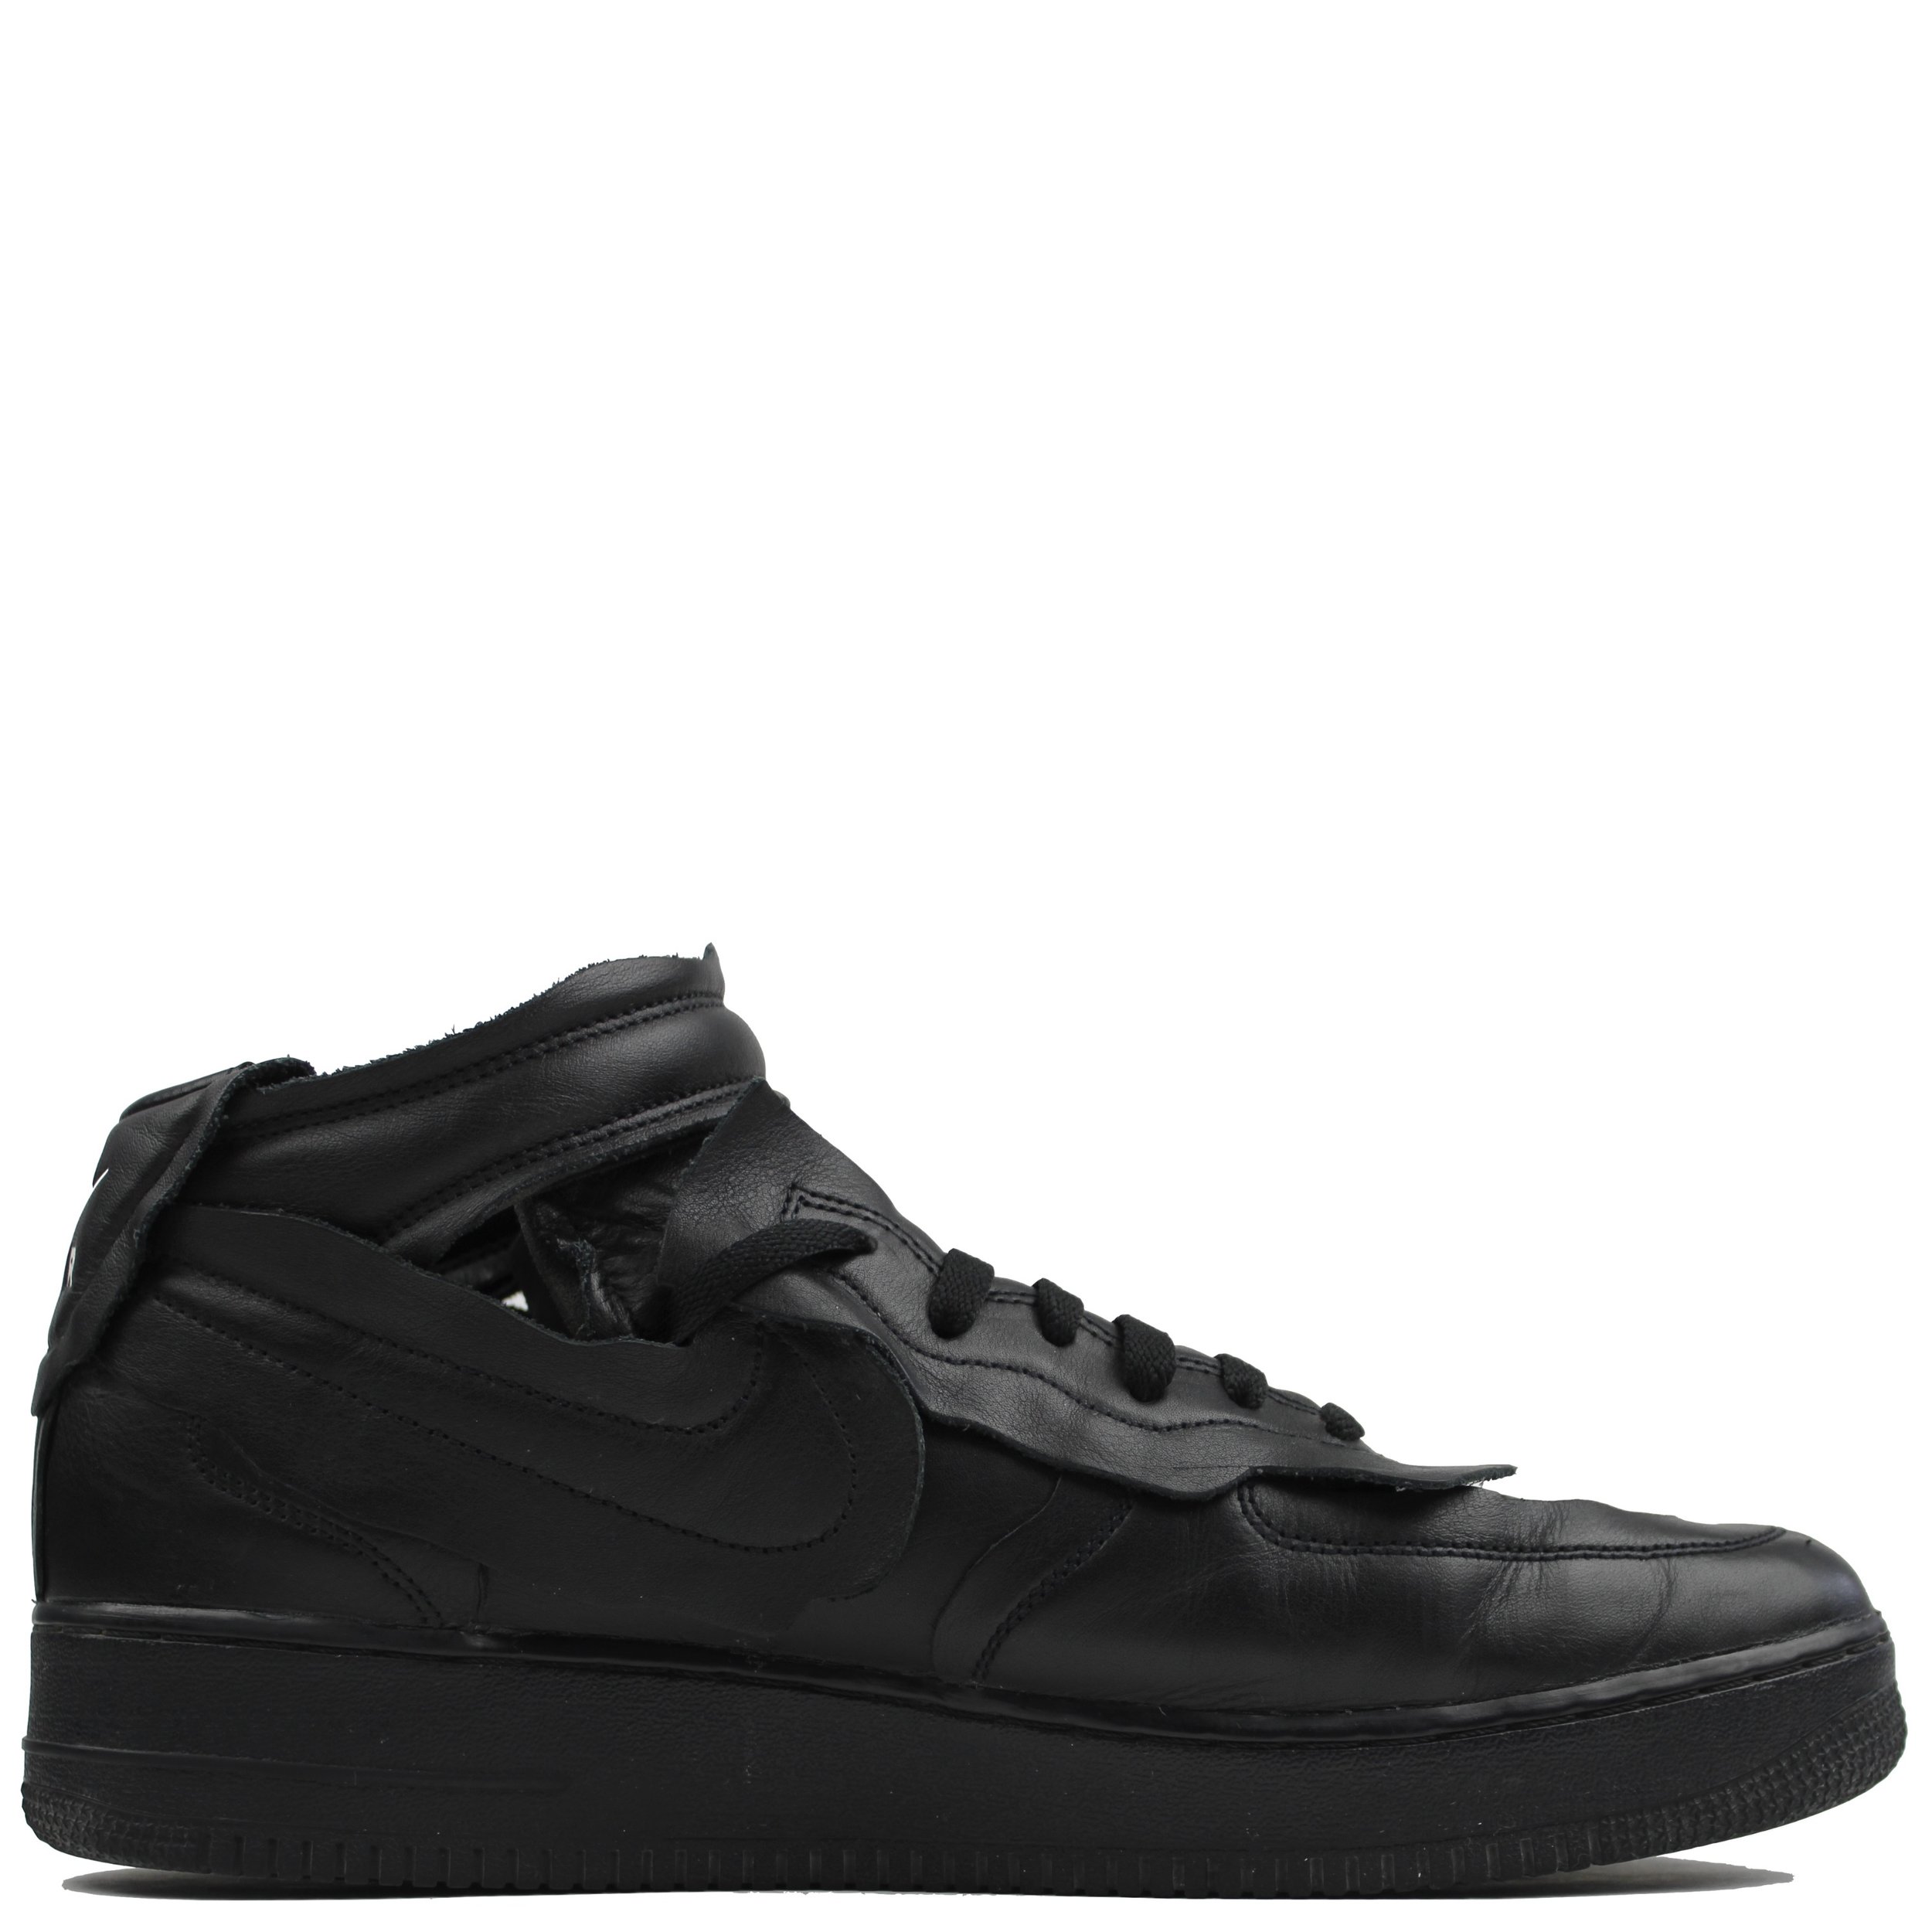 MARKED EU — Nike Air Force 1 Mid Comme des Garcons Black